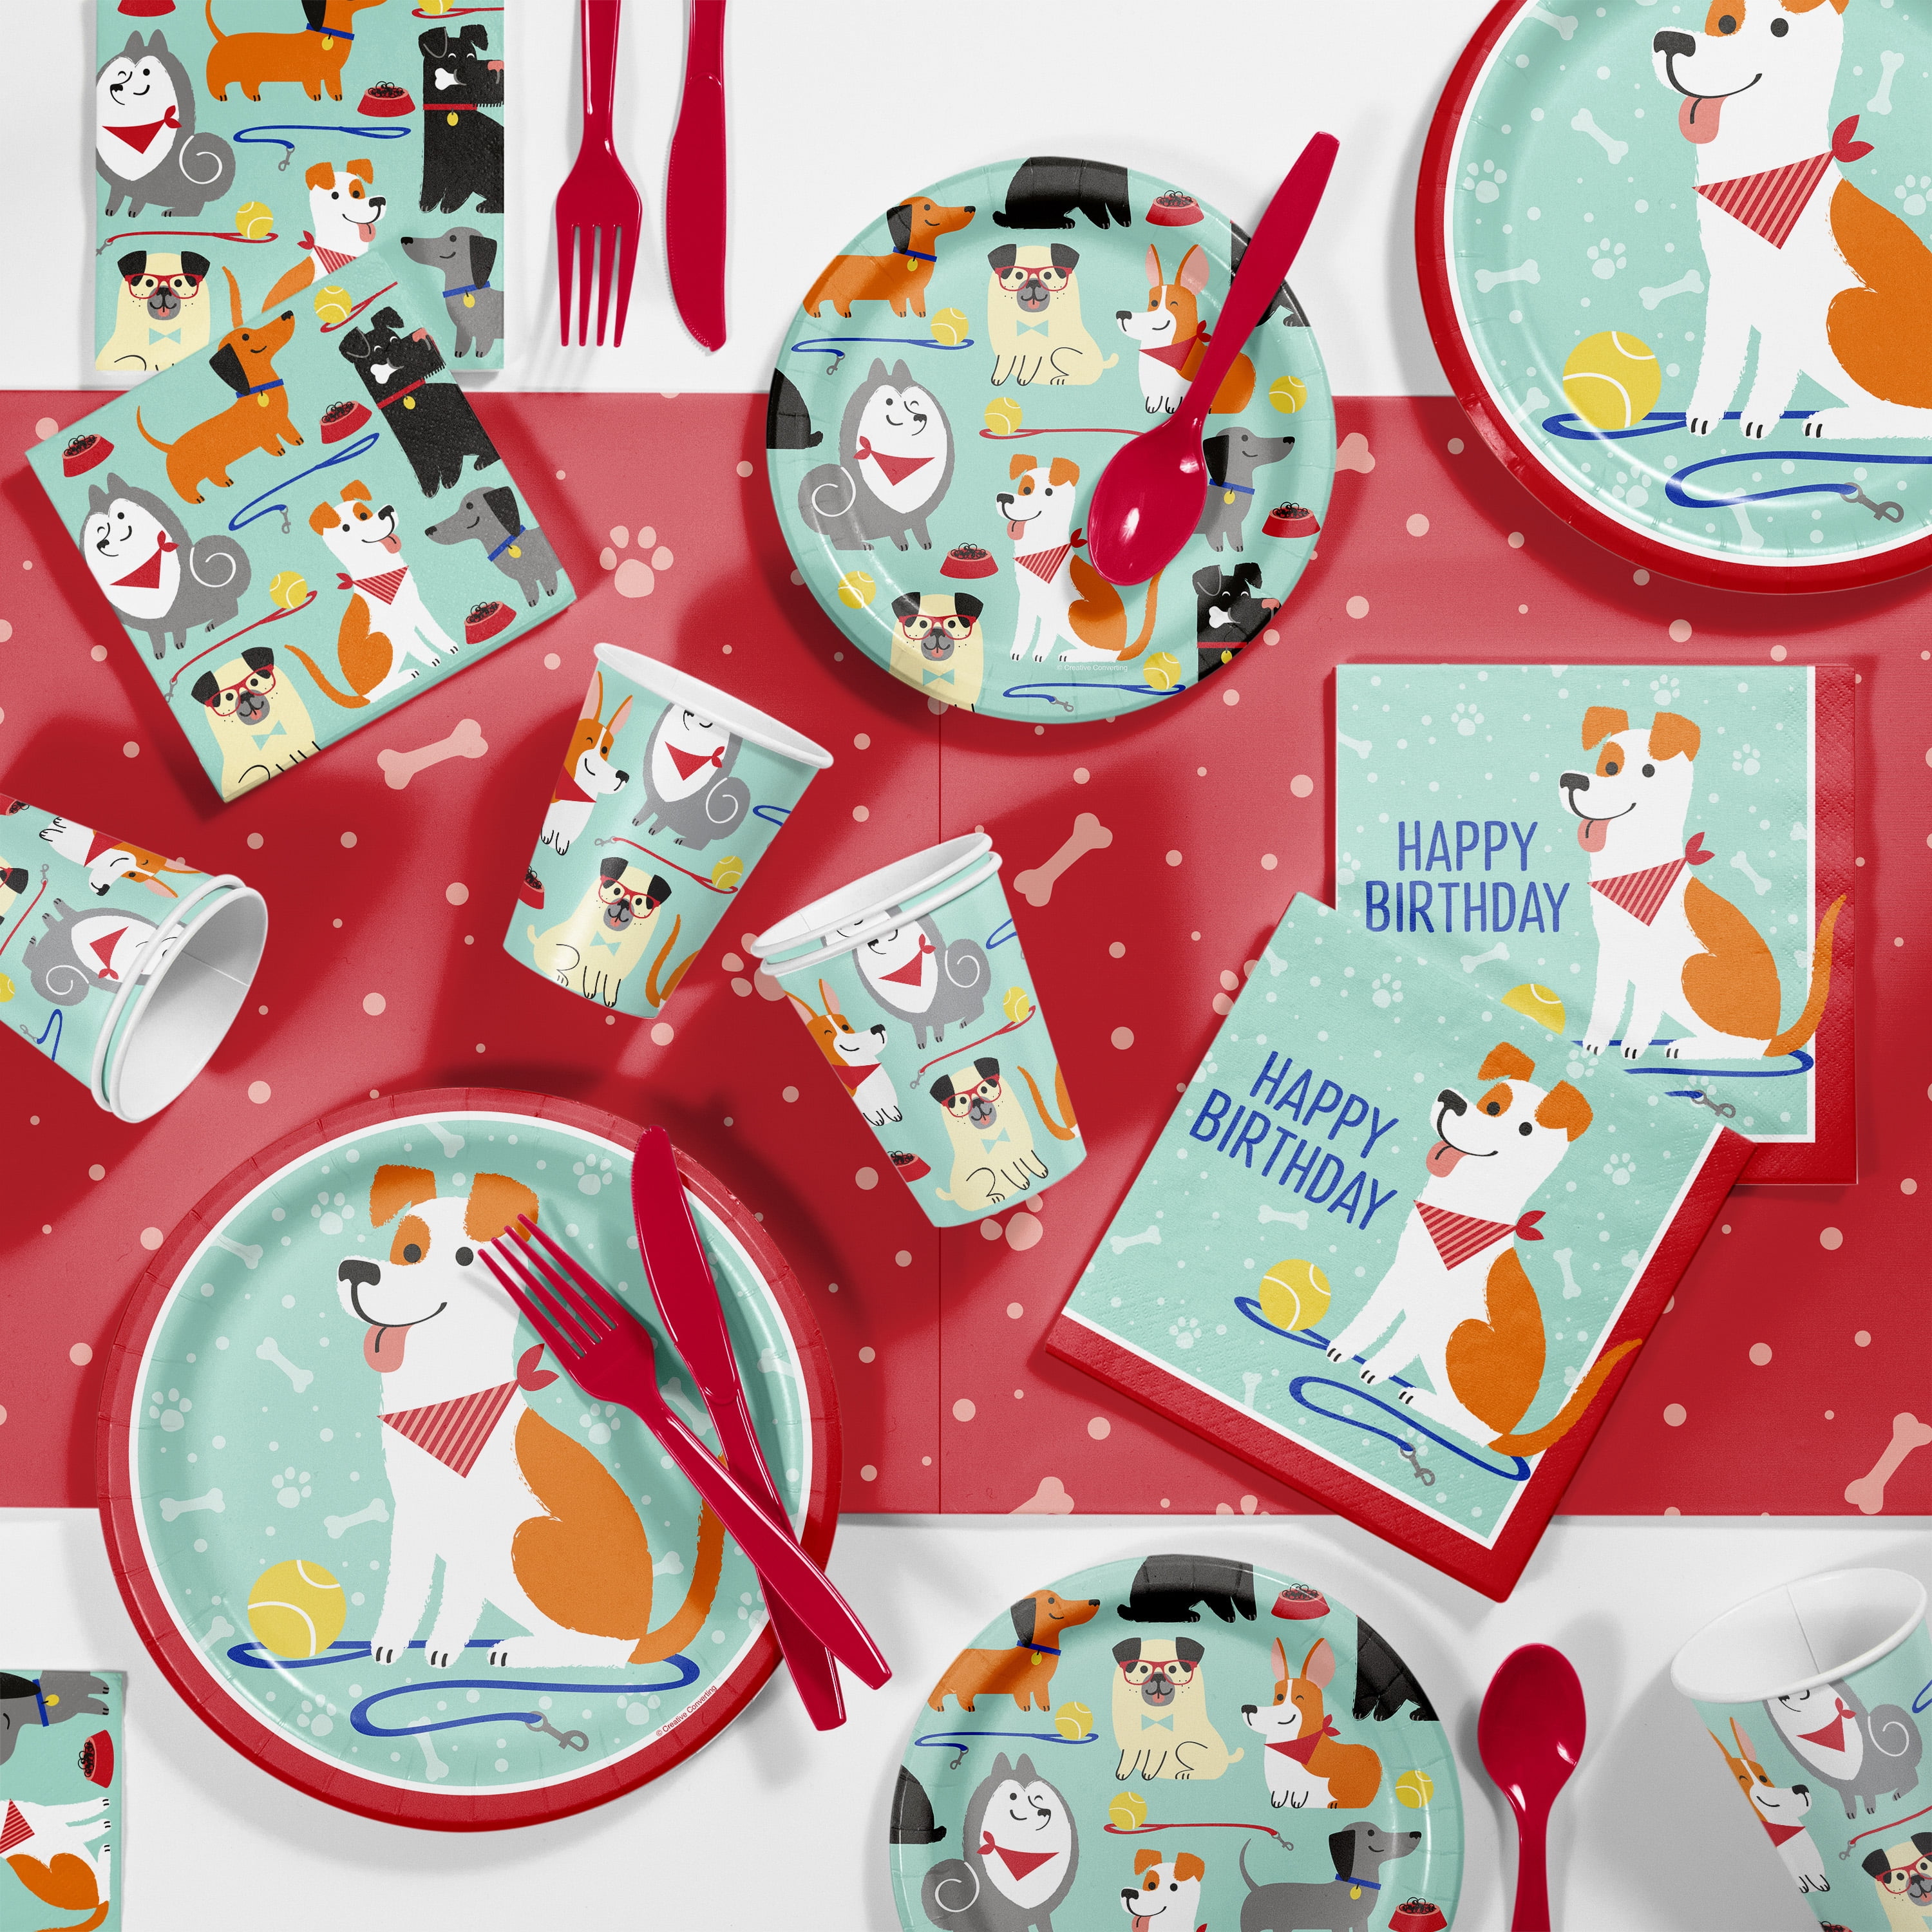 Havercamp Cool Bulldog or Dog Theme Party Set for 16 Guests; Including 16 ea 9” Dinner Plates and Luncheon Napkins and 24 Festive Party Picks.